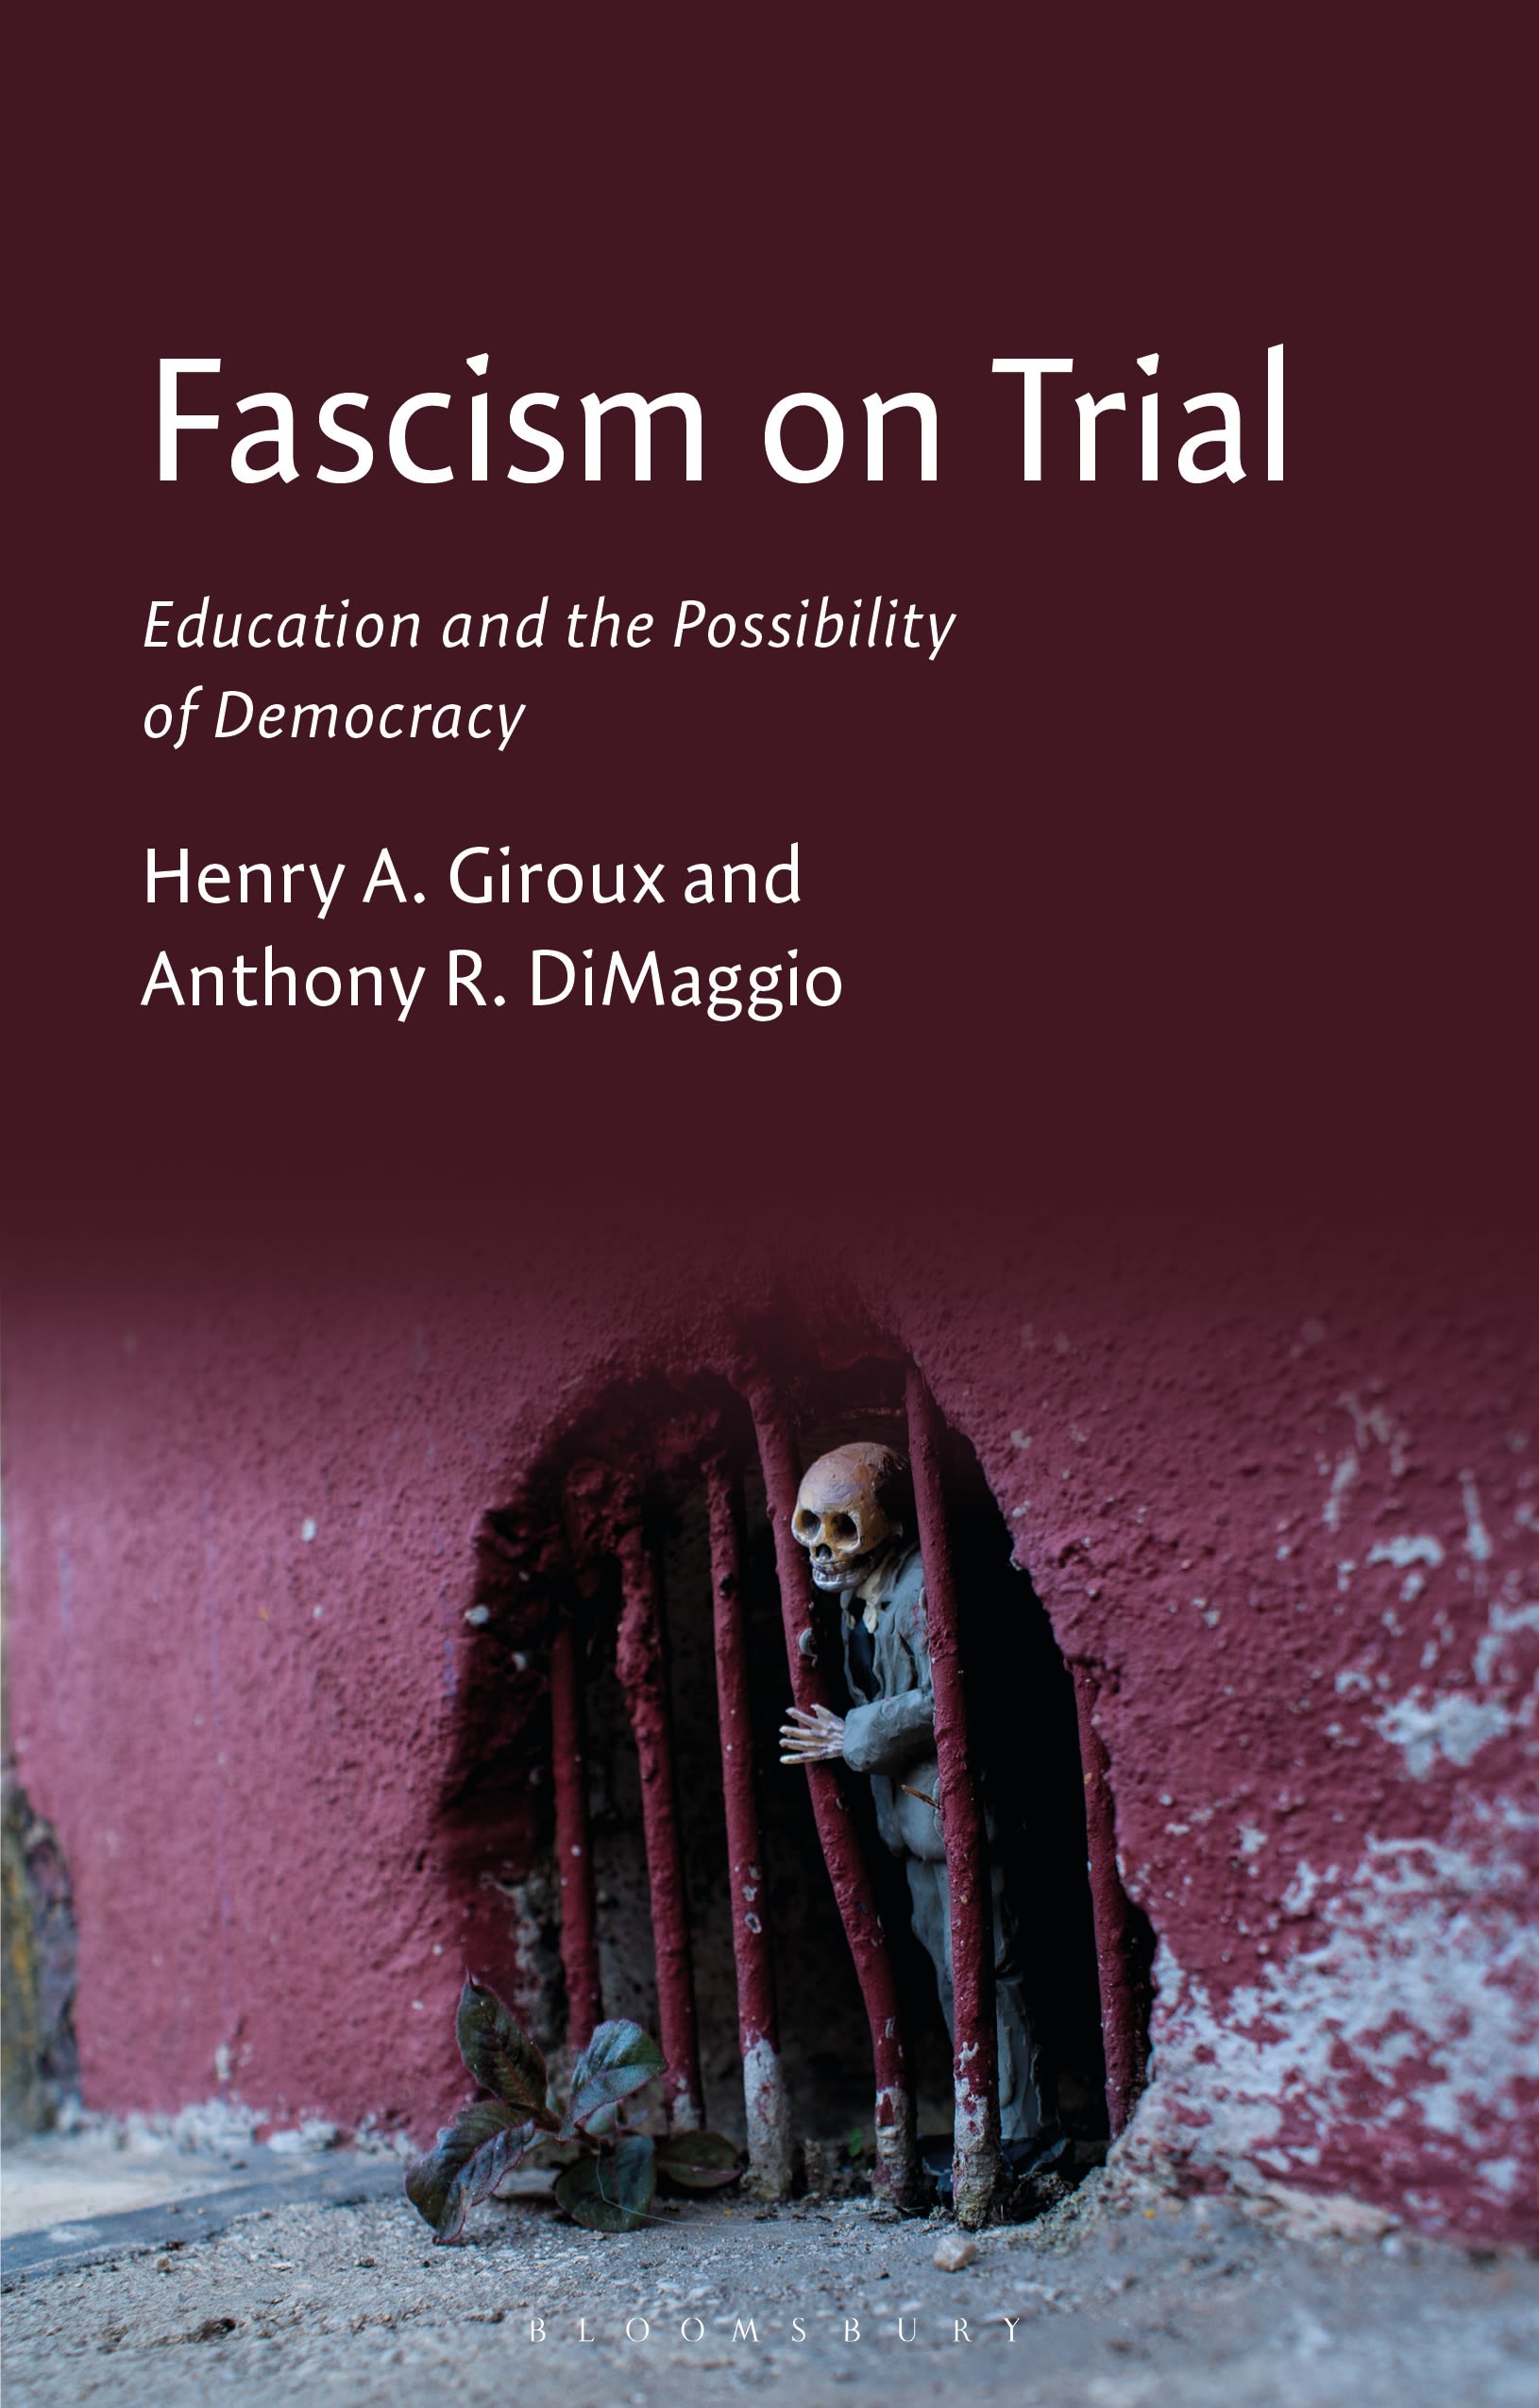 FASCISM ON TRIAL: EDUCATION AND THE POSSIBILITY OF DEMOCRACY